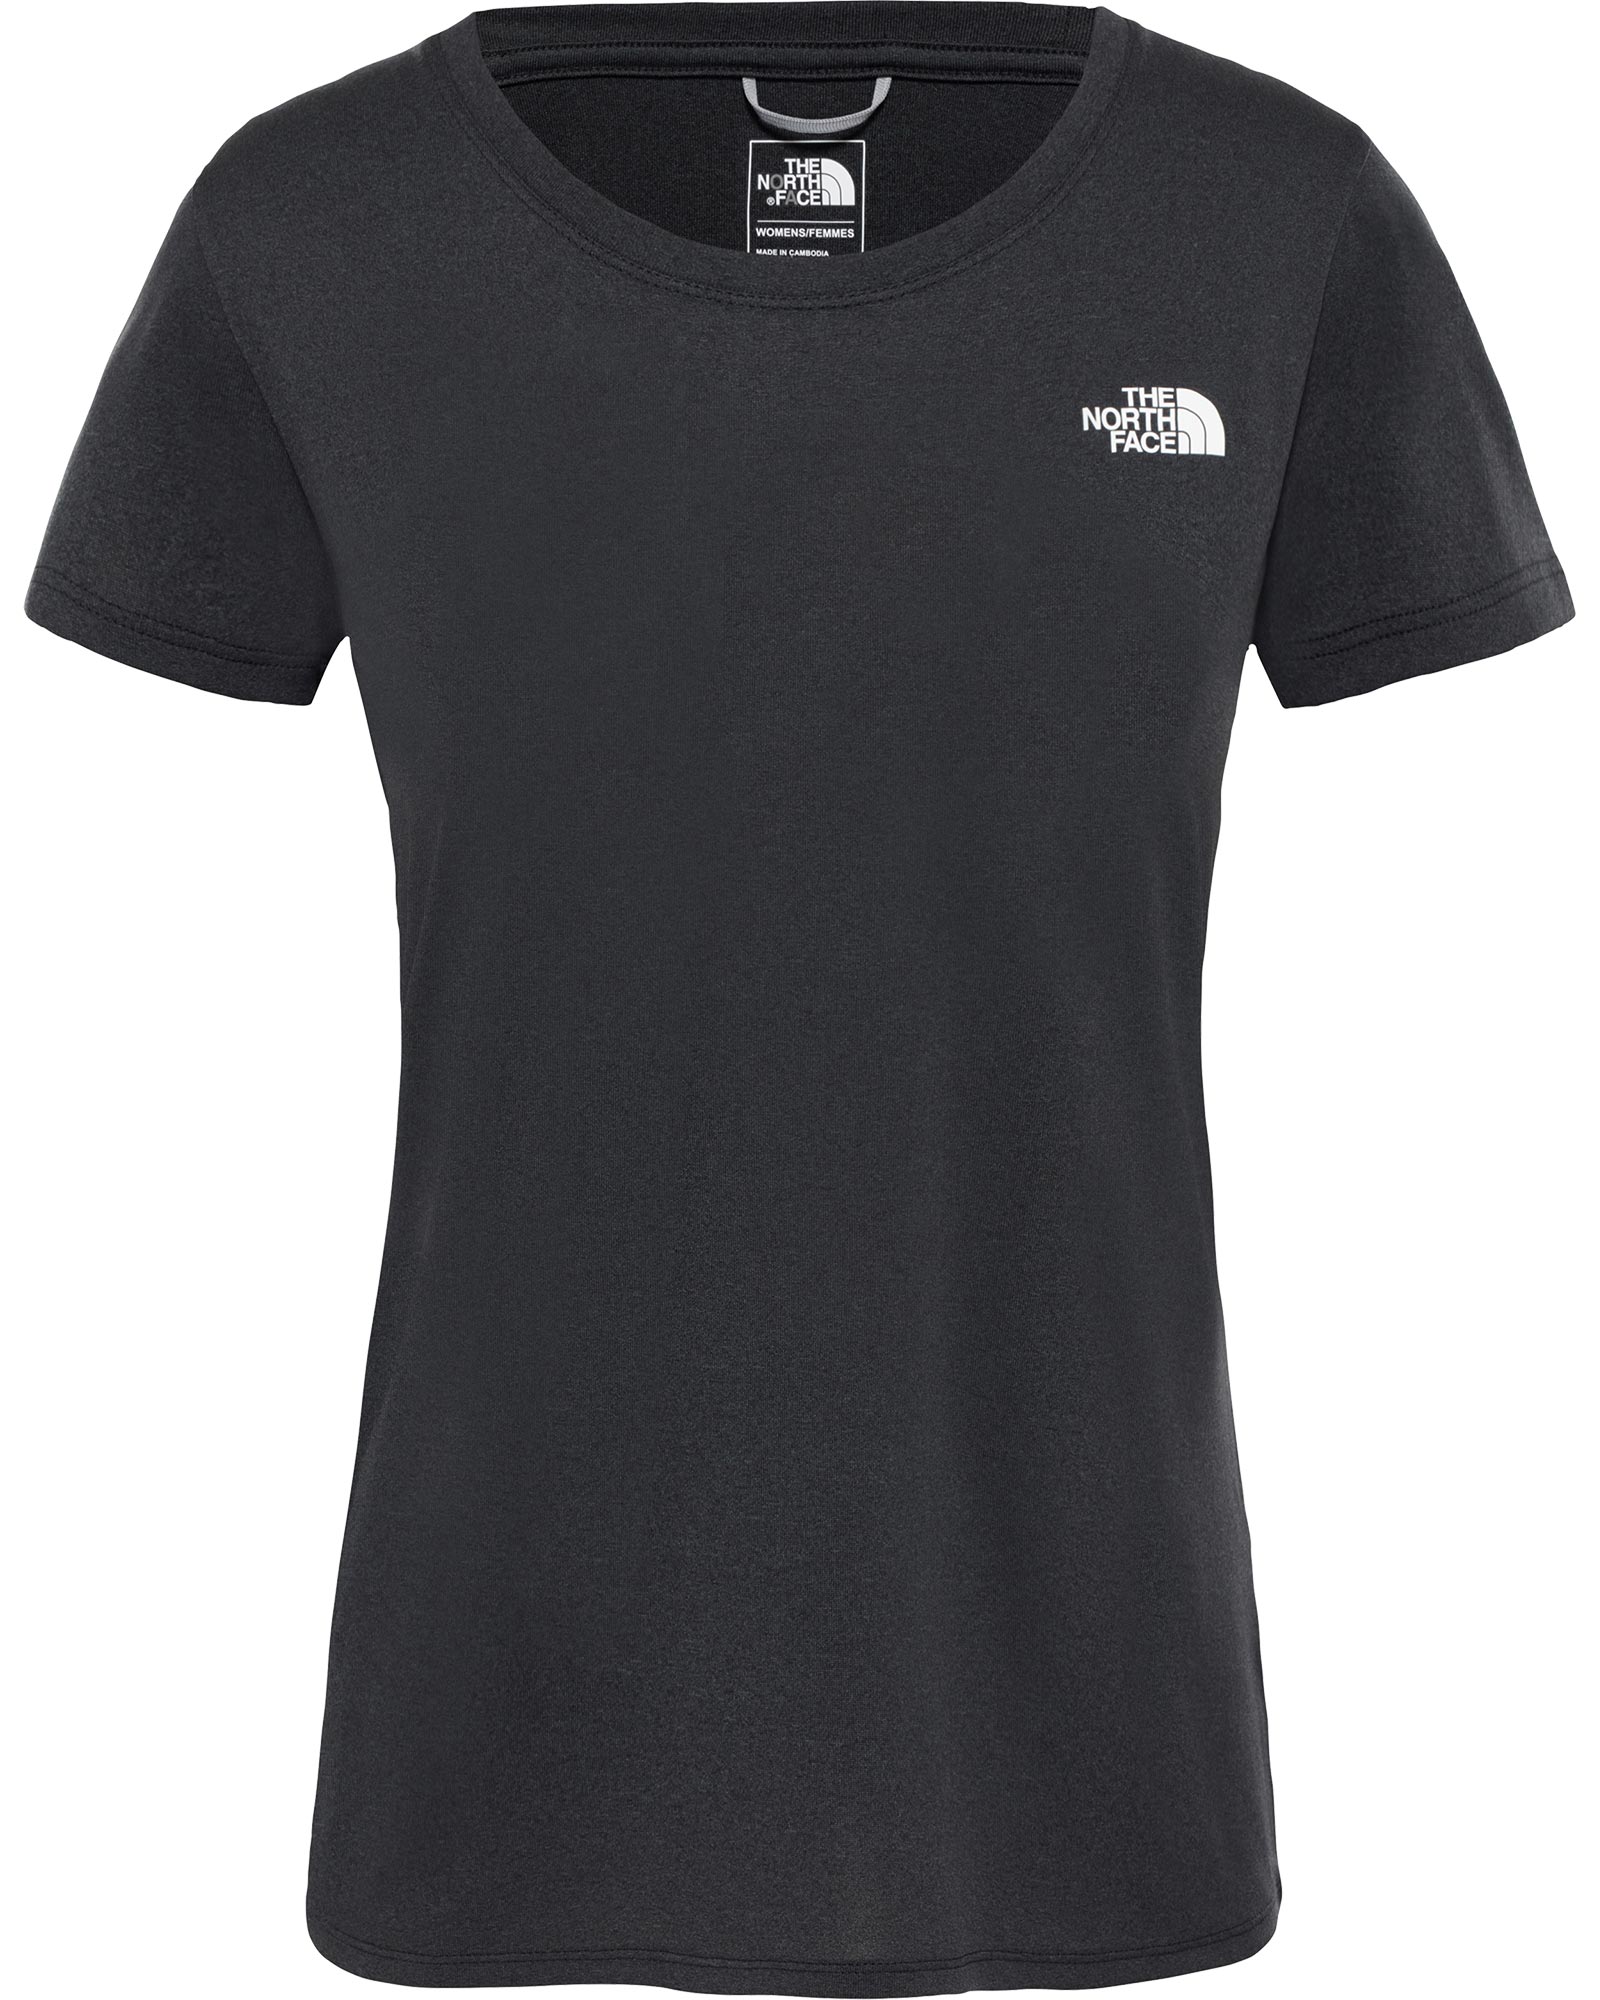 The North Face Reaxion Amp Women’s Crew T Shirt - TNF Black Heather M